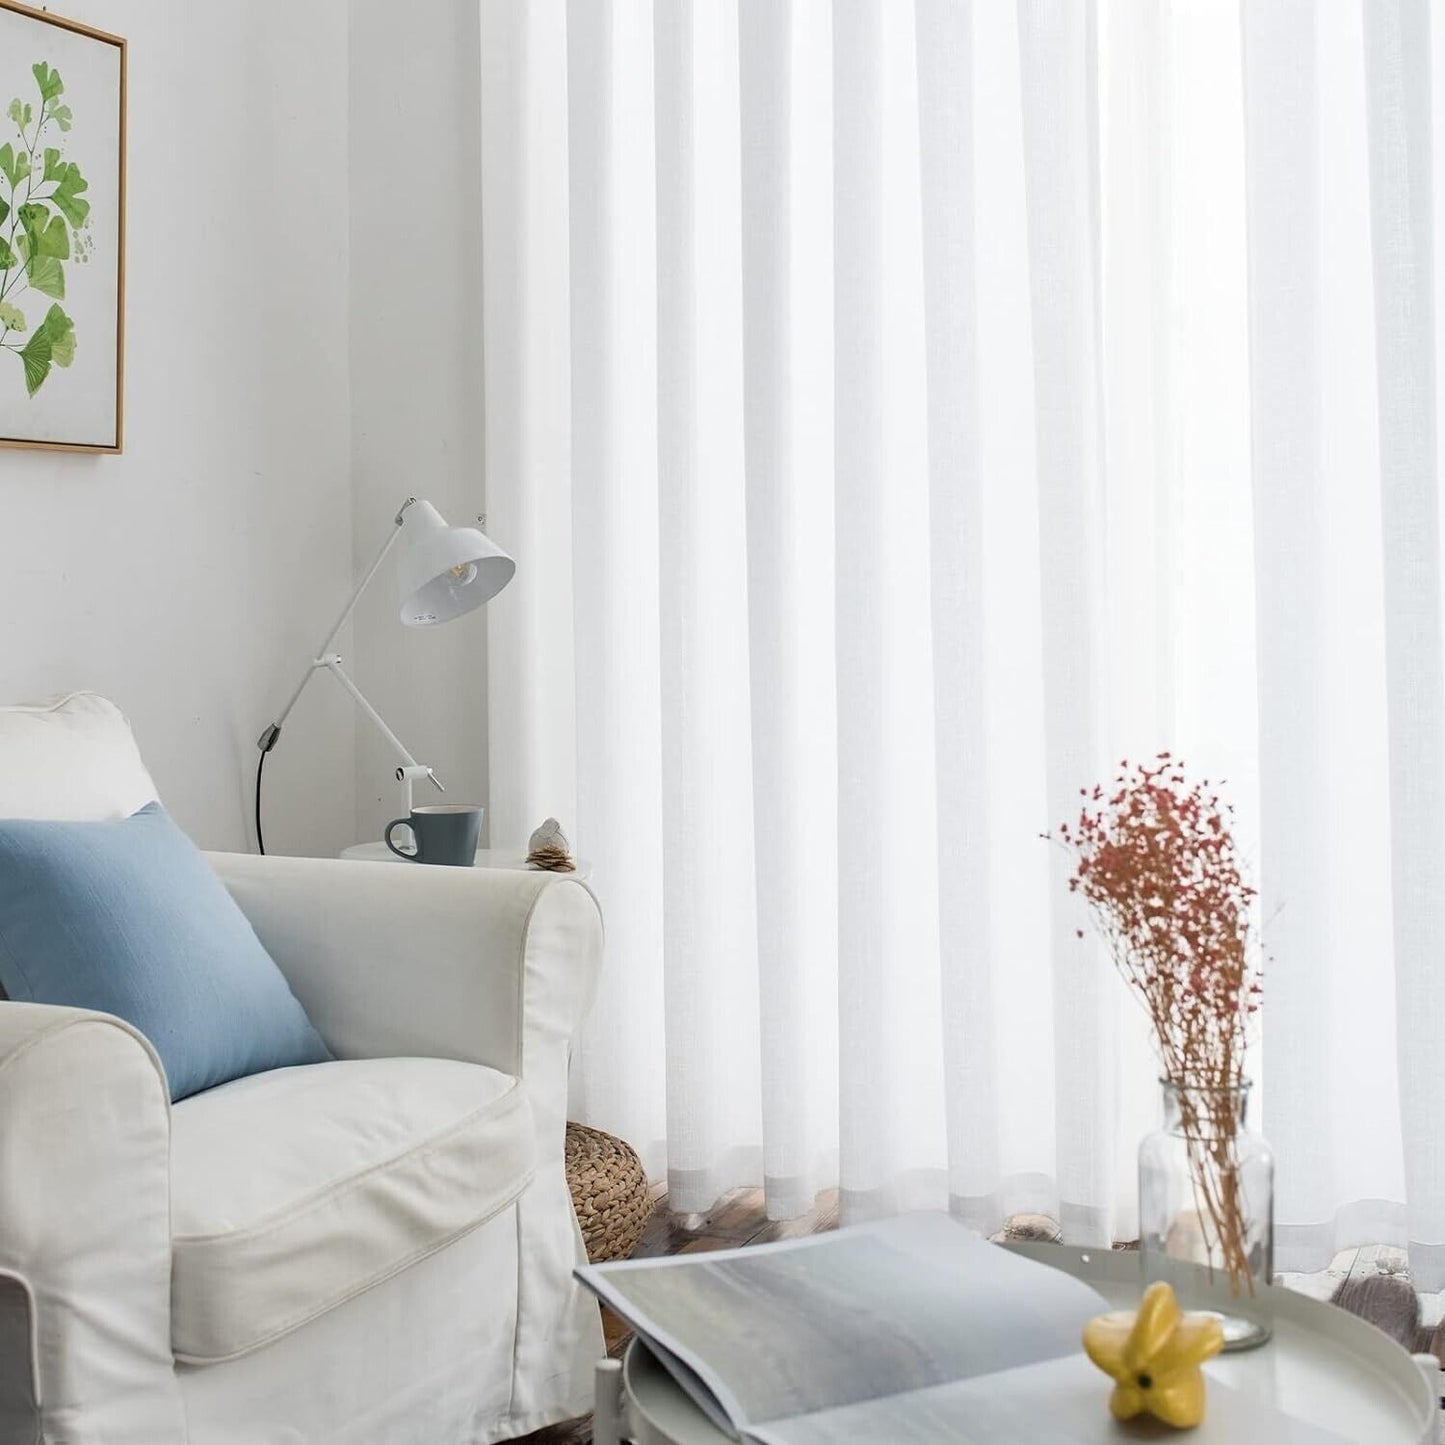 Melodieux White Semi Sheer Curtains for Living Room - Linen Look